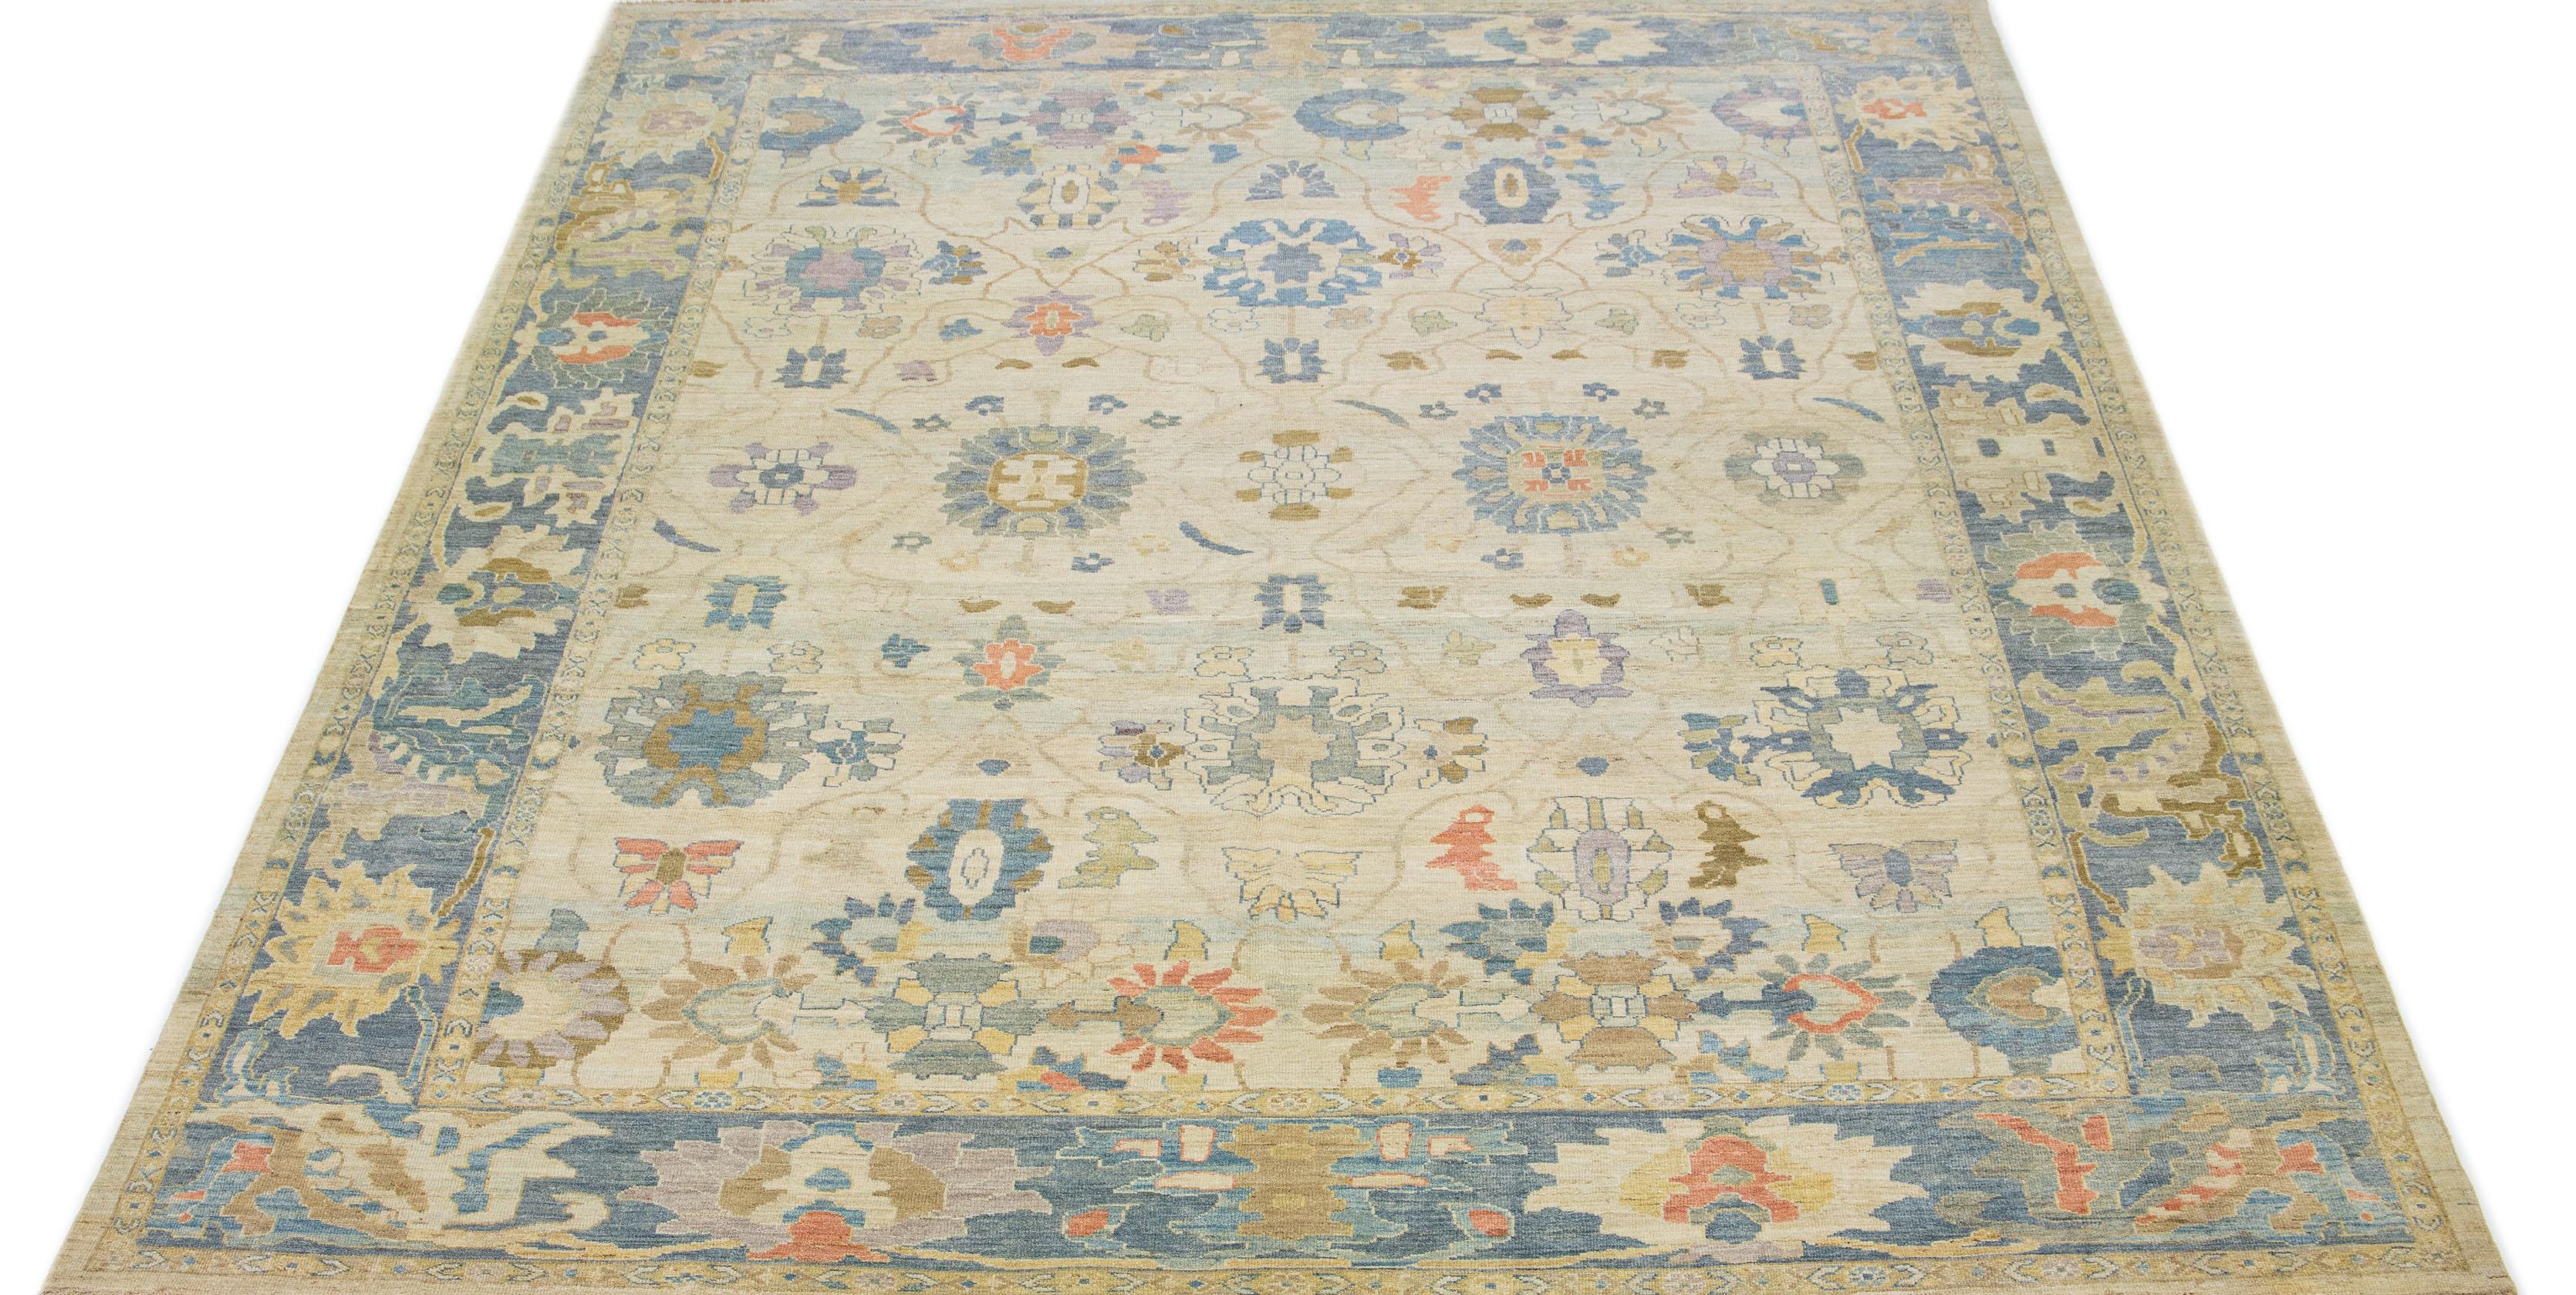 Beautiful modern Sultanabad hand-knotted wool rug with a beige color field. This rug has a navy blue-designed frame with multicolor accents in a gorgeous all-over floral motif.

This rug measures 12'5